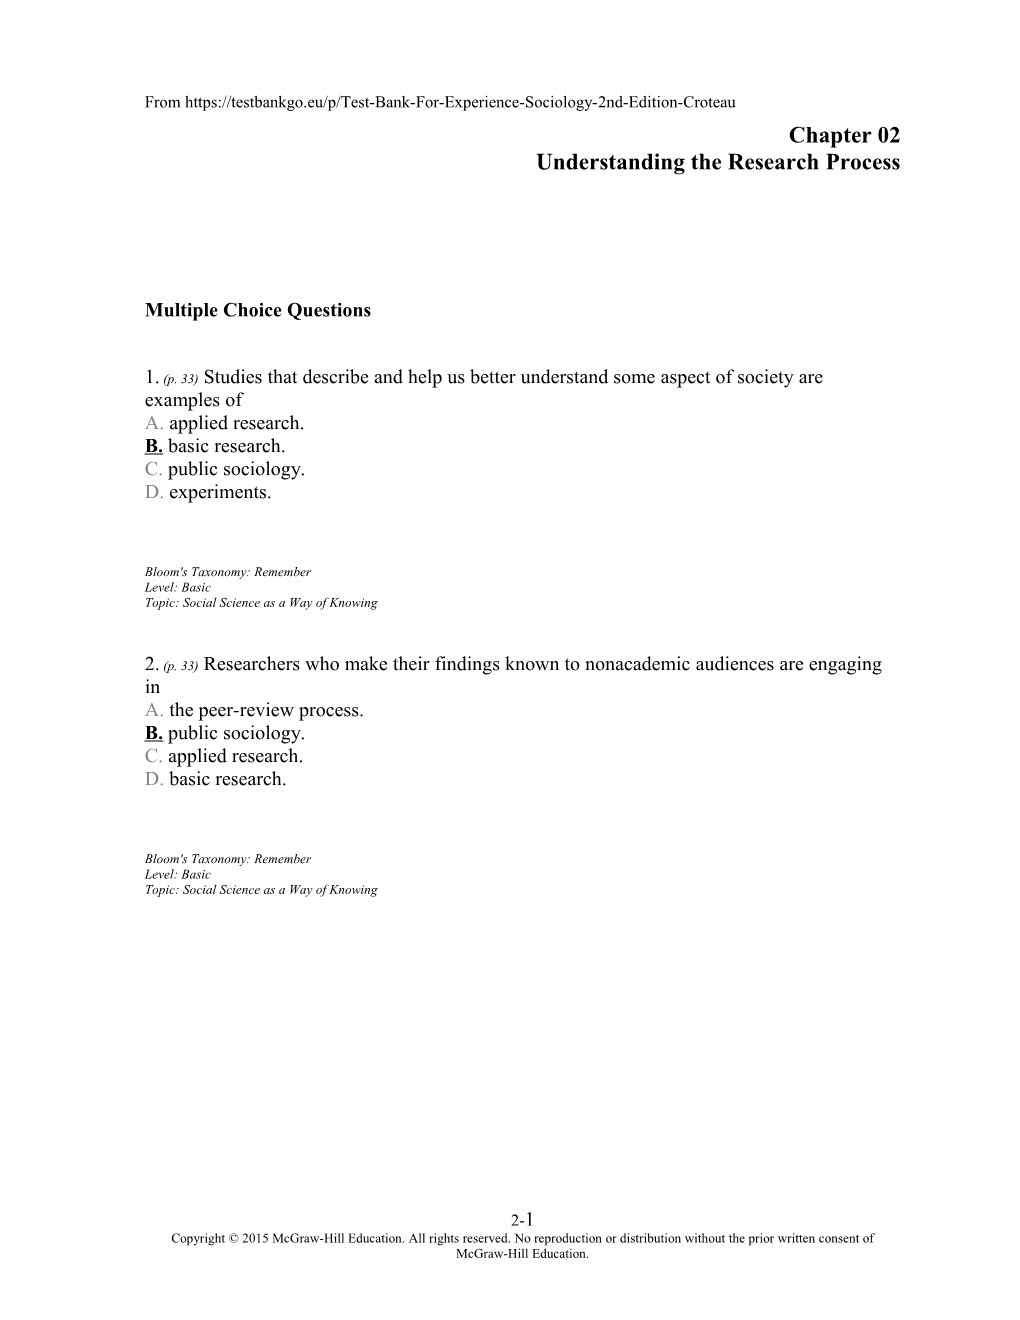 Chapter 02 Understanding the Research Process